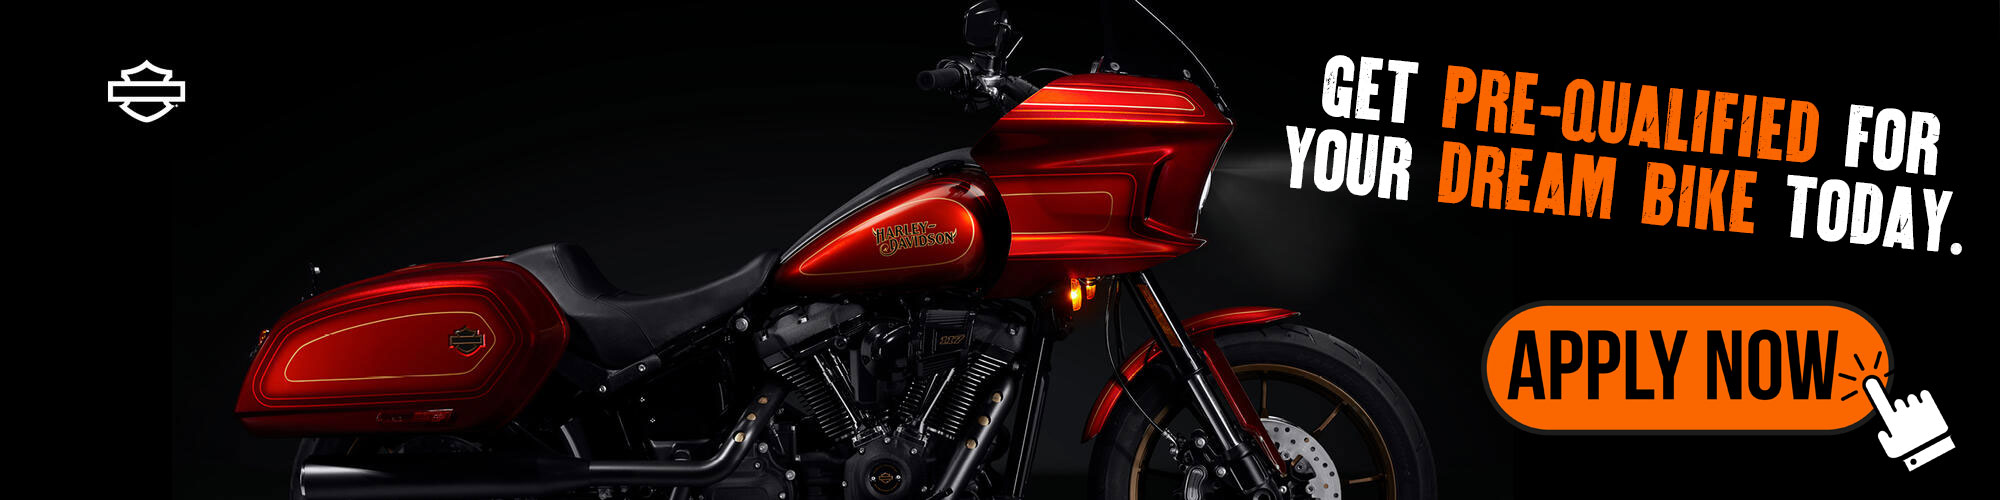 Get Pre-Qualified for your Dream Bike Today. Harley-Davidson